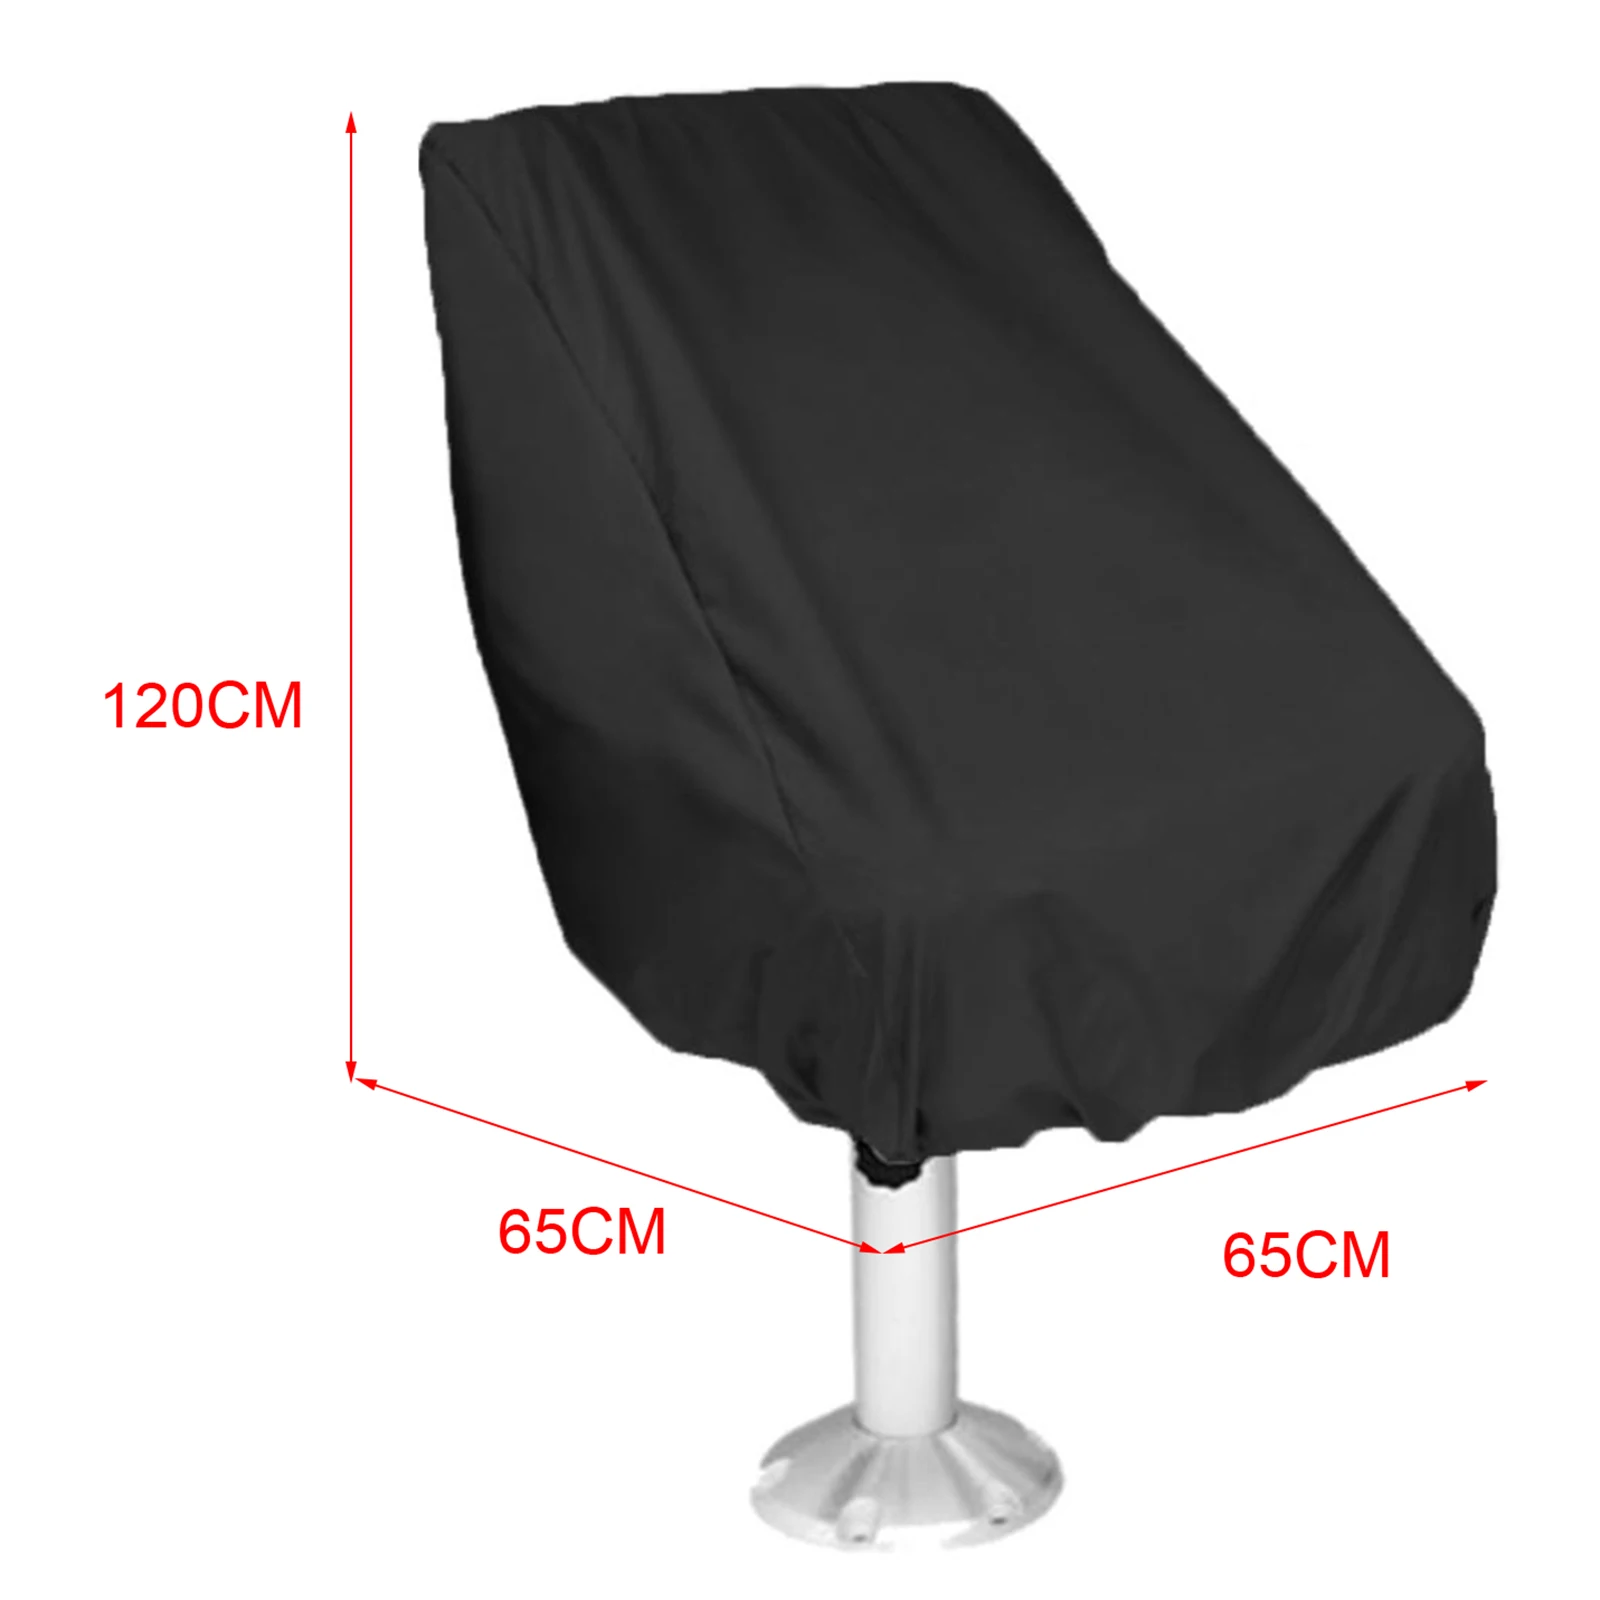 210D Boat Seat Fabric Cover Canvas Multicolor 6565120 Protector Helmsman Captain Chair Seat Covers Foldable